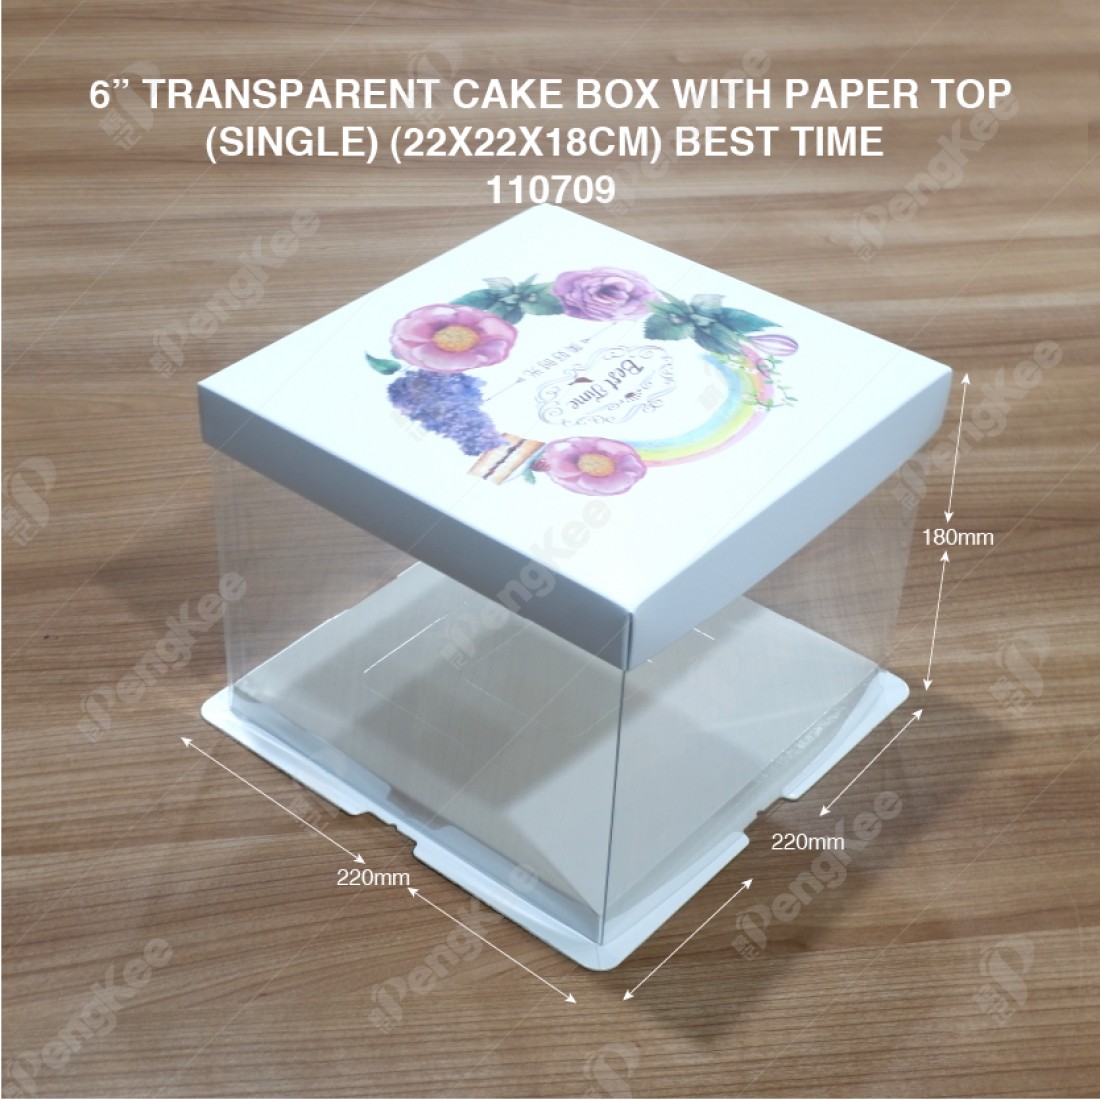 6" TRANSPARENT CAKE BOX WITH PAPER TOP(SINGLE) (22*22*18CM)- BEST TIME